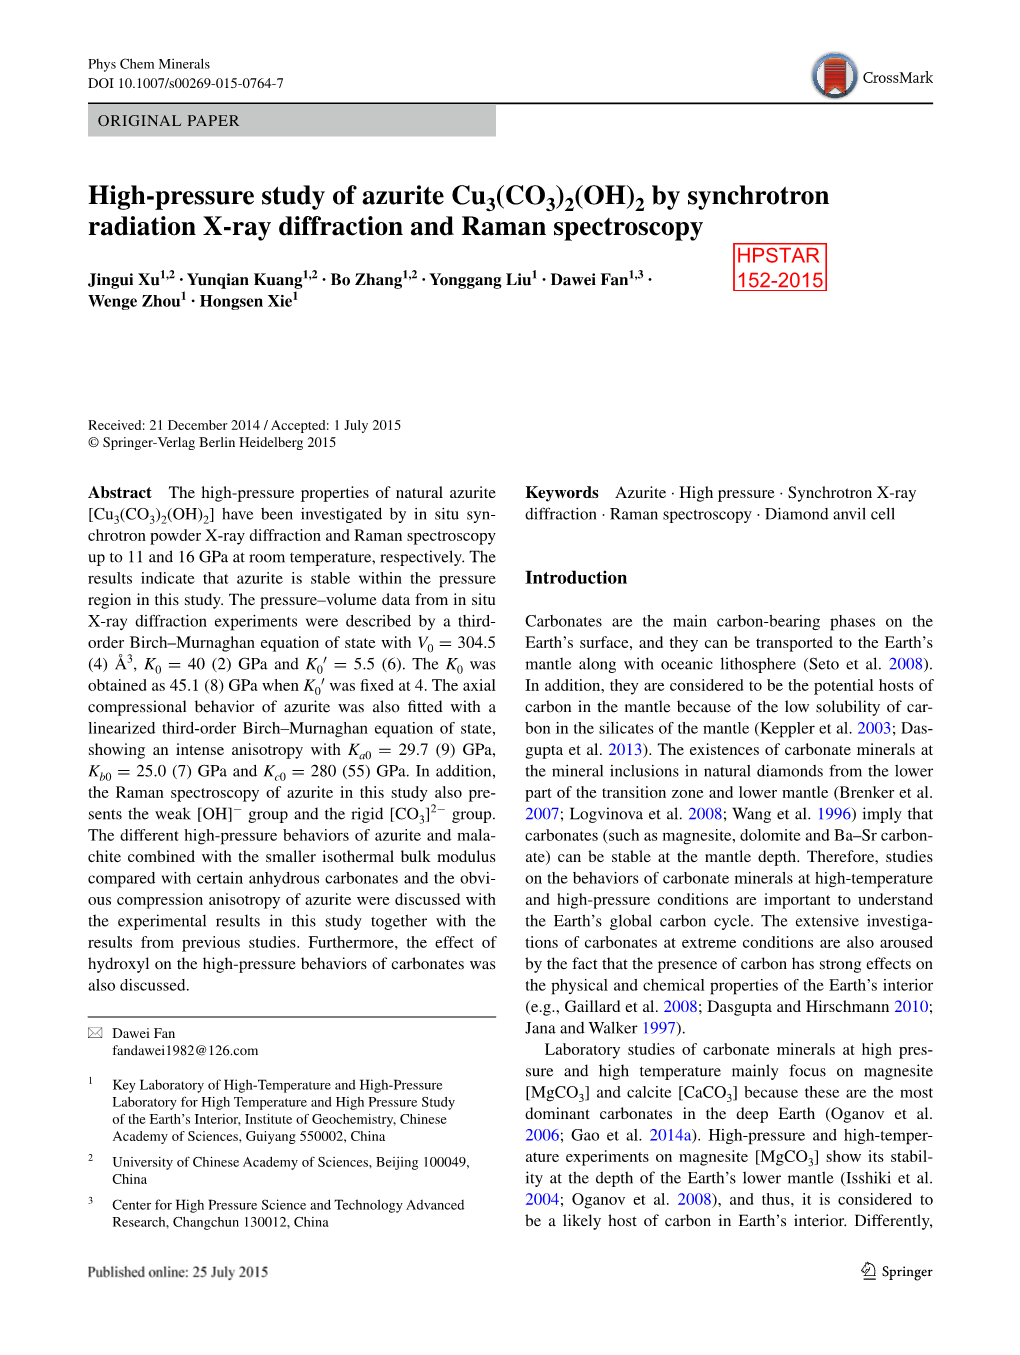 High-Pressure Study of Azurite Cu3(CO3)2(OH)2 by Synchrotron